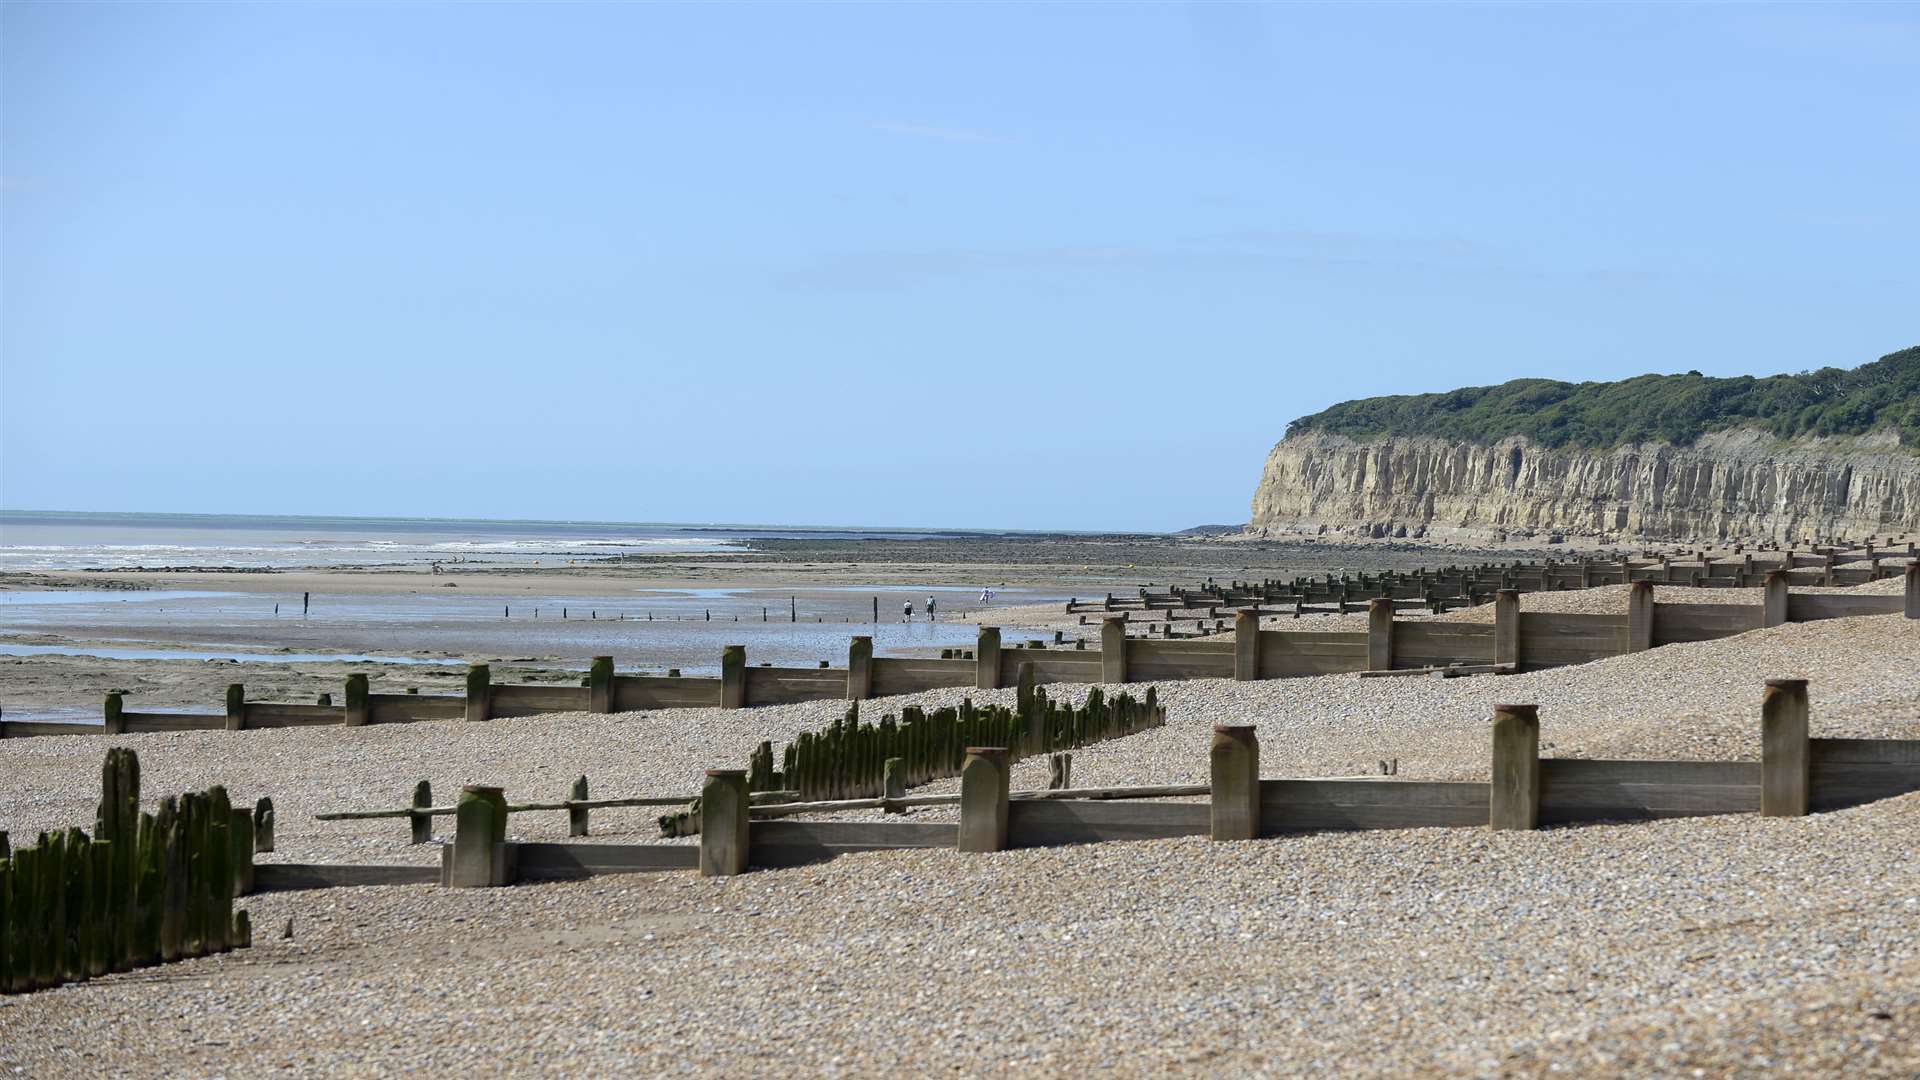 The beach at Winchelsea, near to where the aircraft crashed. Picture: Barry Goodwin.